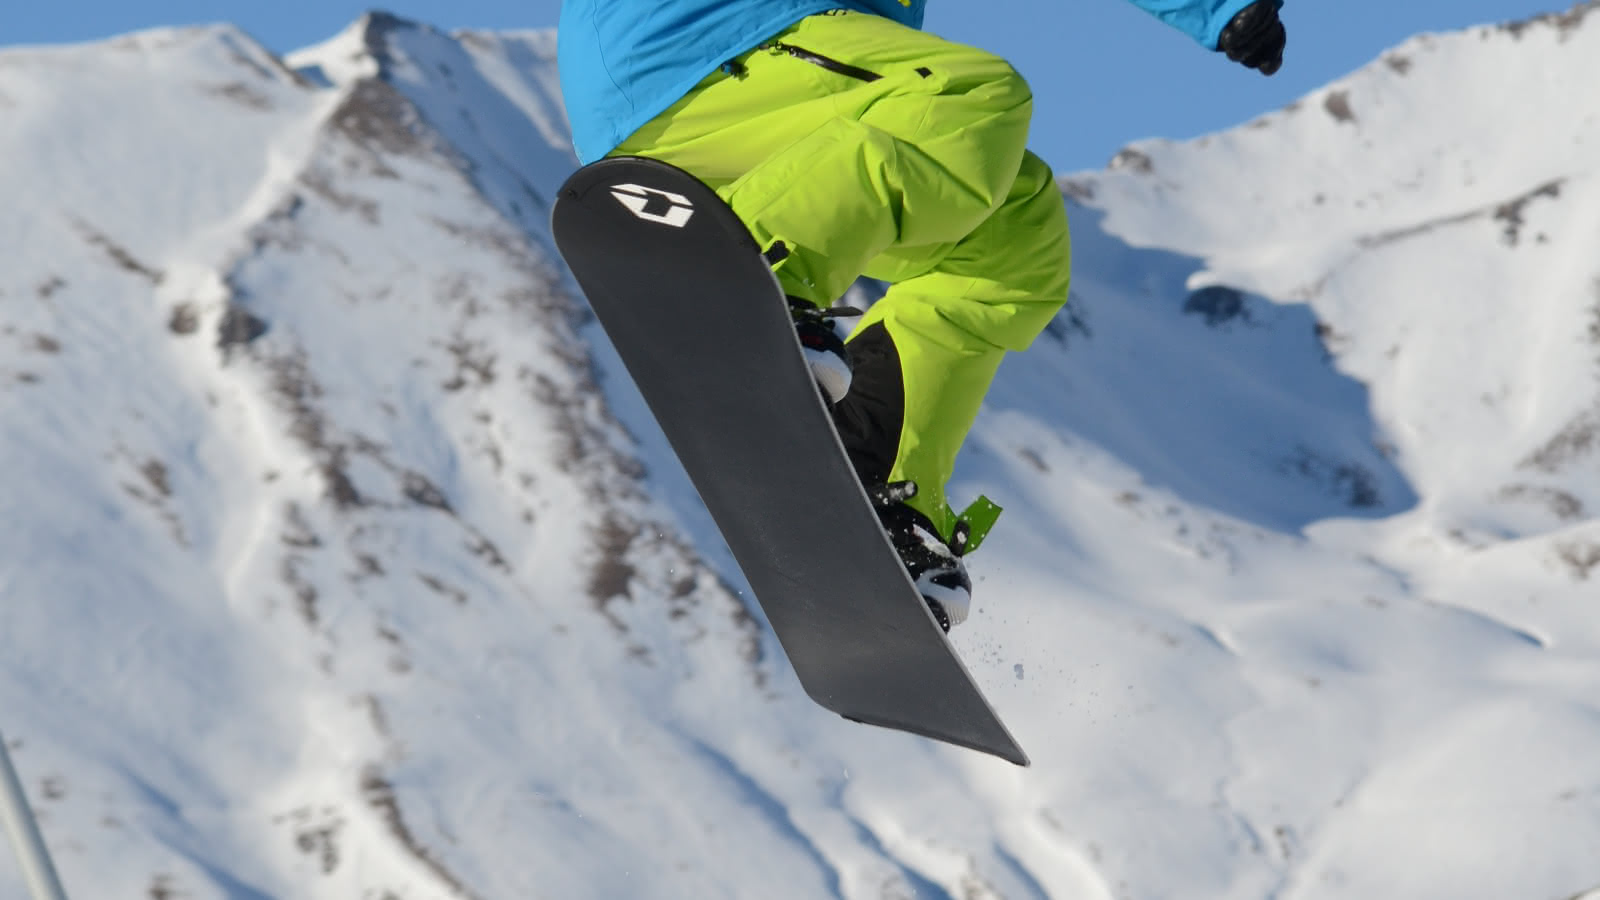 Learn how to snowboard in the French Alps. Snowboarding lessons for all levels, from beginner to expert.